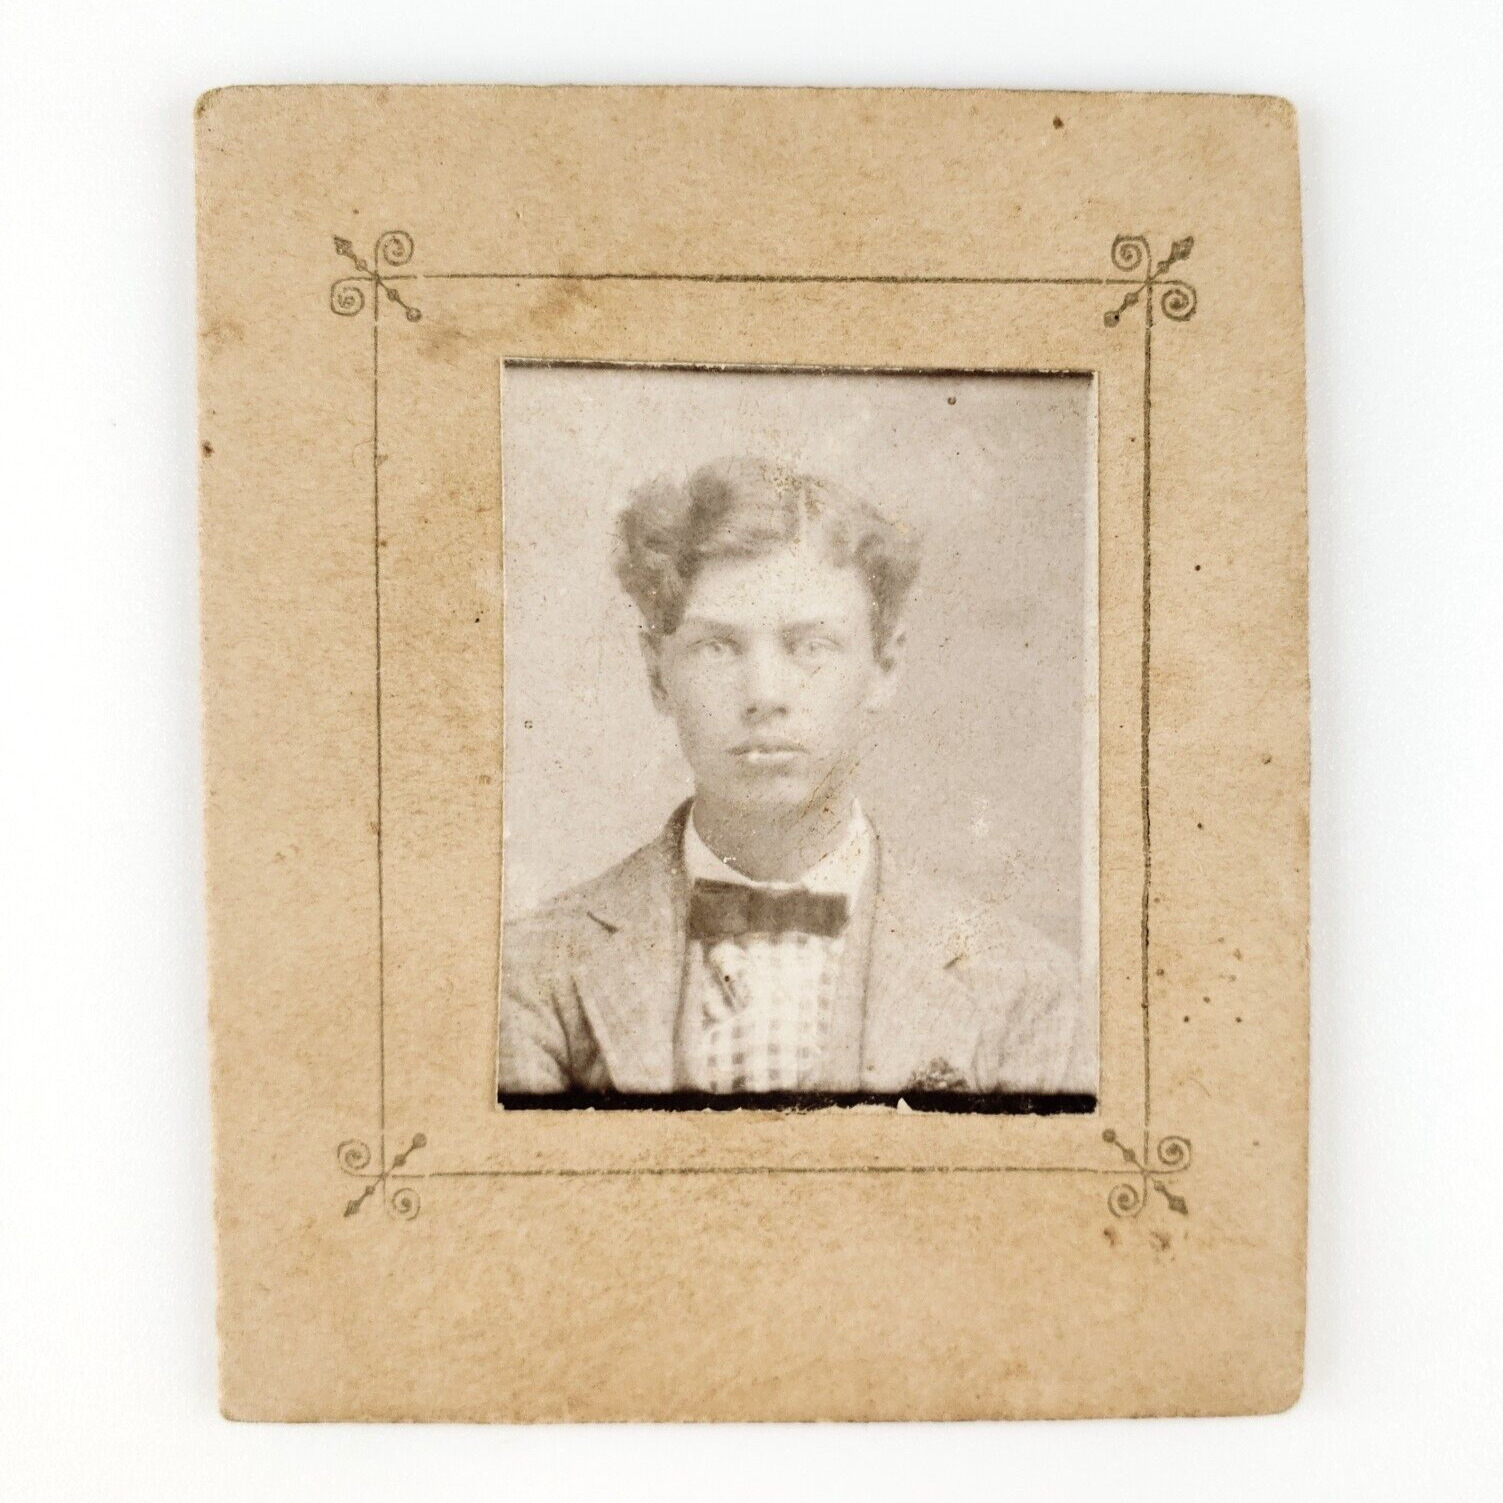 Adorable Named Young Man Photo c1892 Antique Small Card-Mounted Portrait D1790